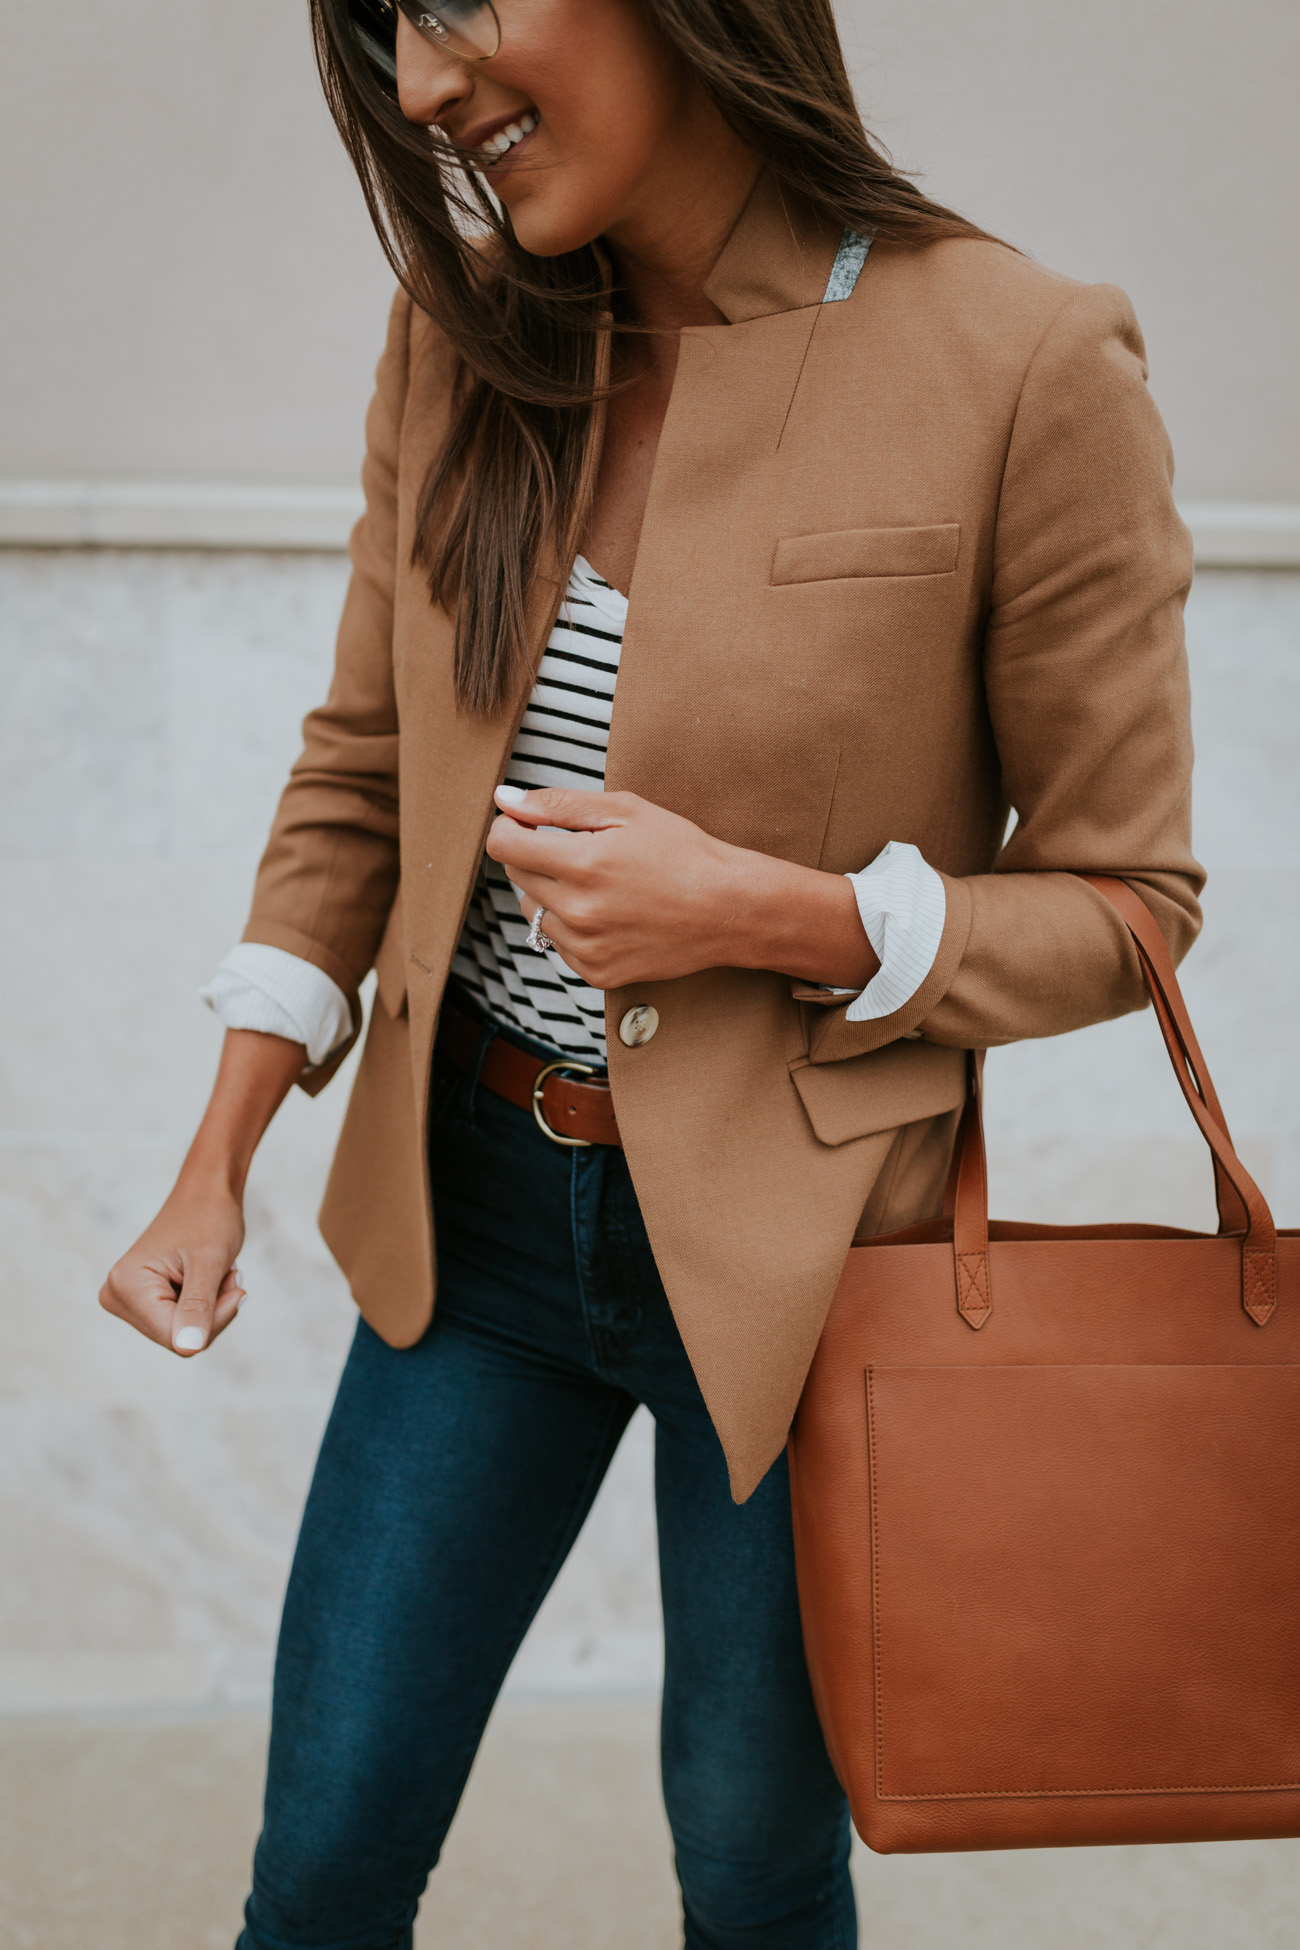 native deodorant, camel blazer, stripe tee, stripe top, cognac booties, fall booties, madewell transport tote, madewell tote // grace wainwright grace white a southern drawl